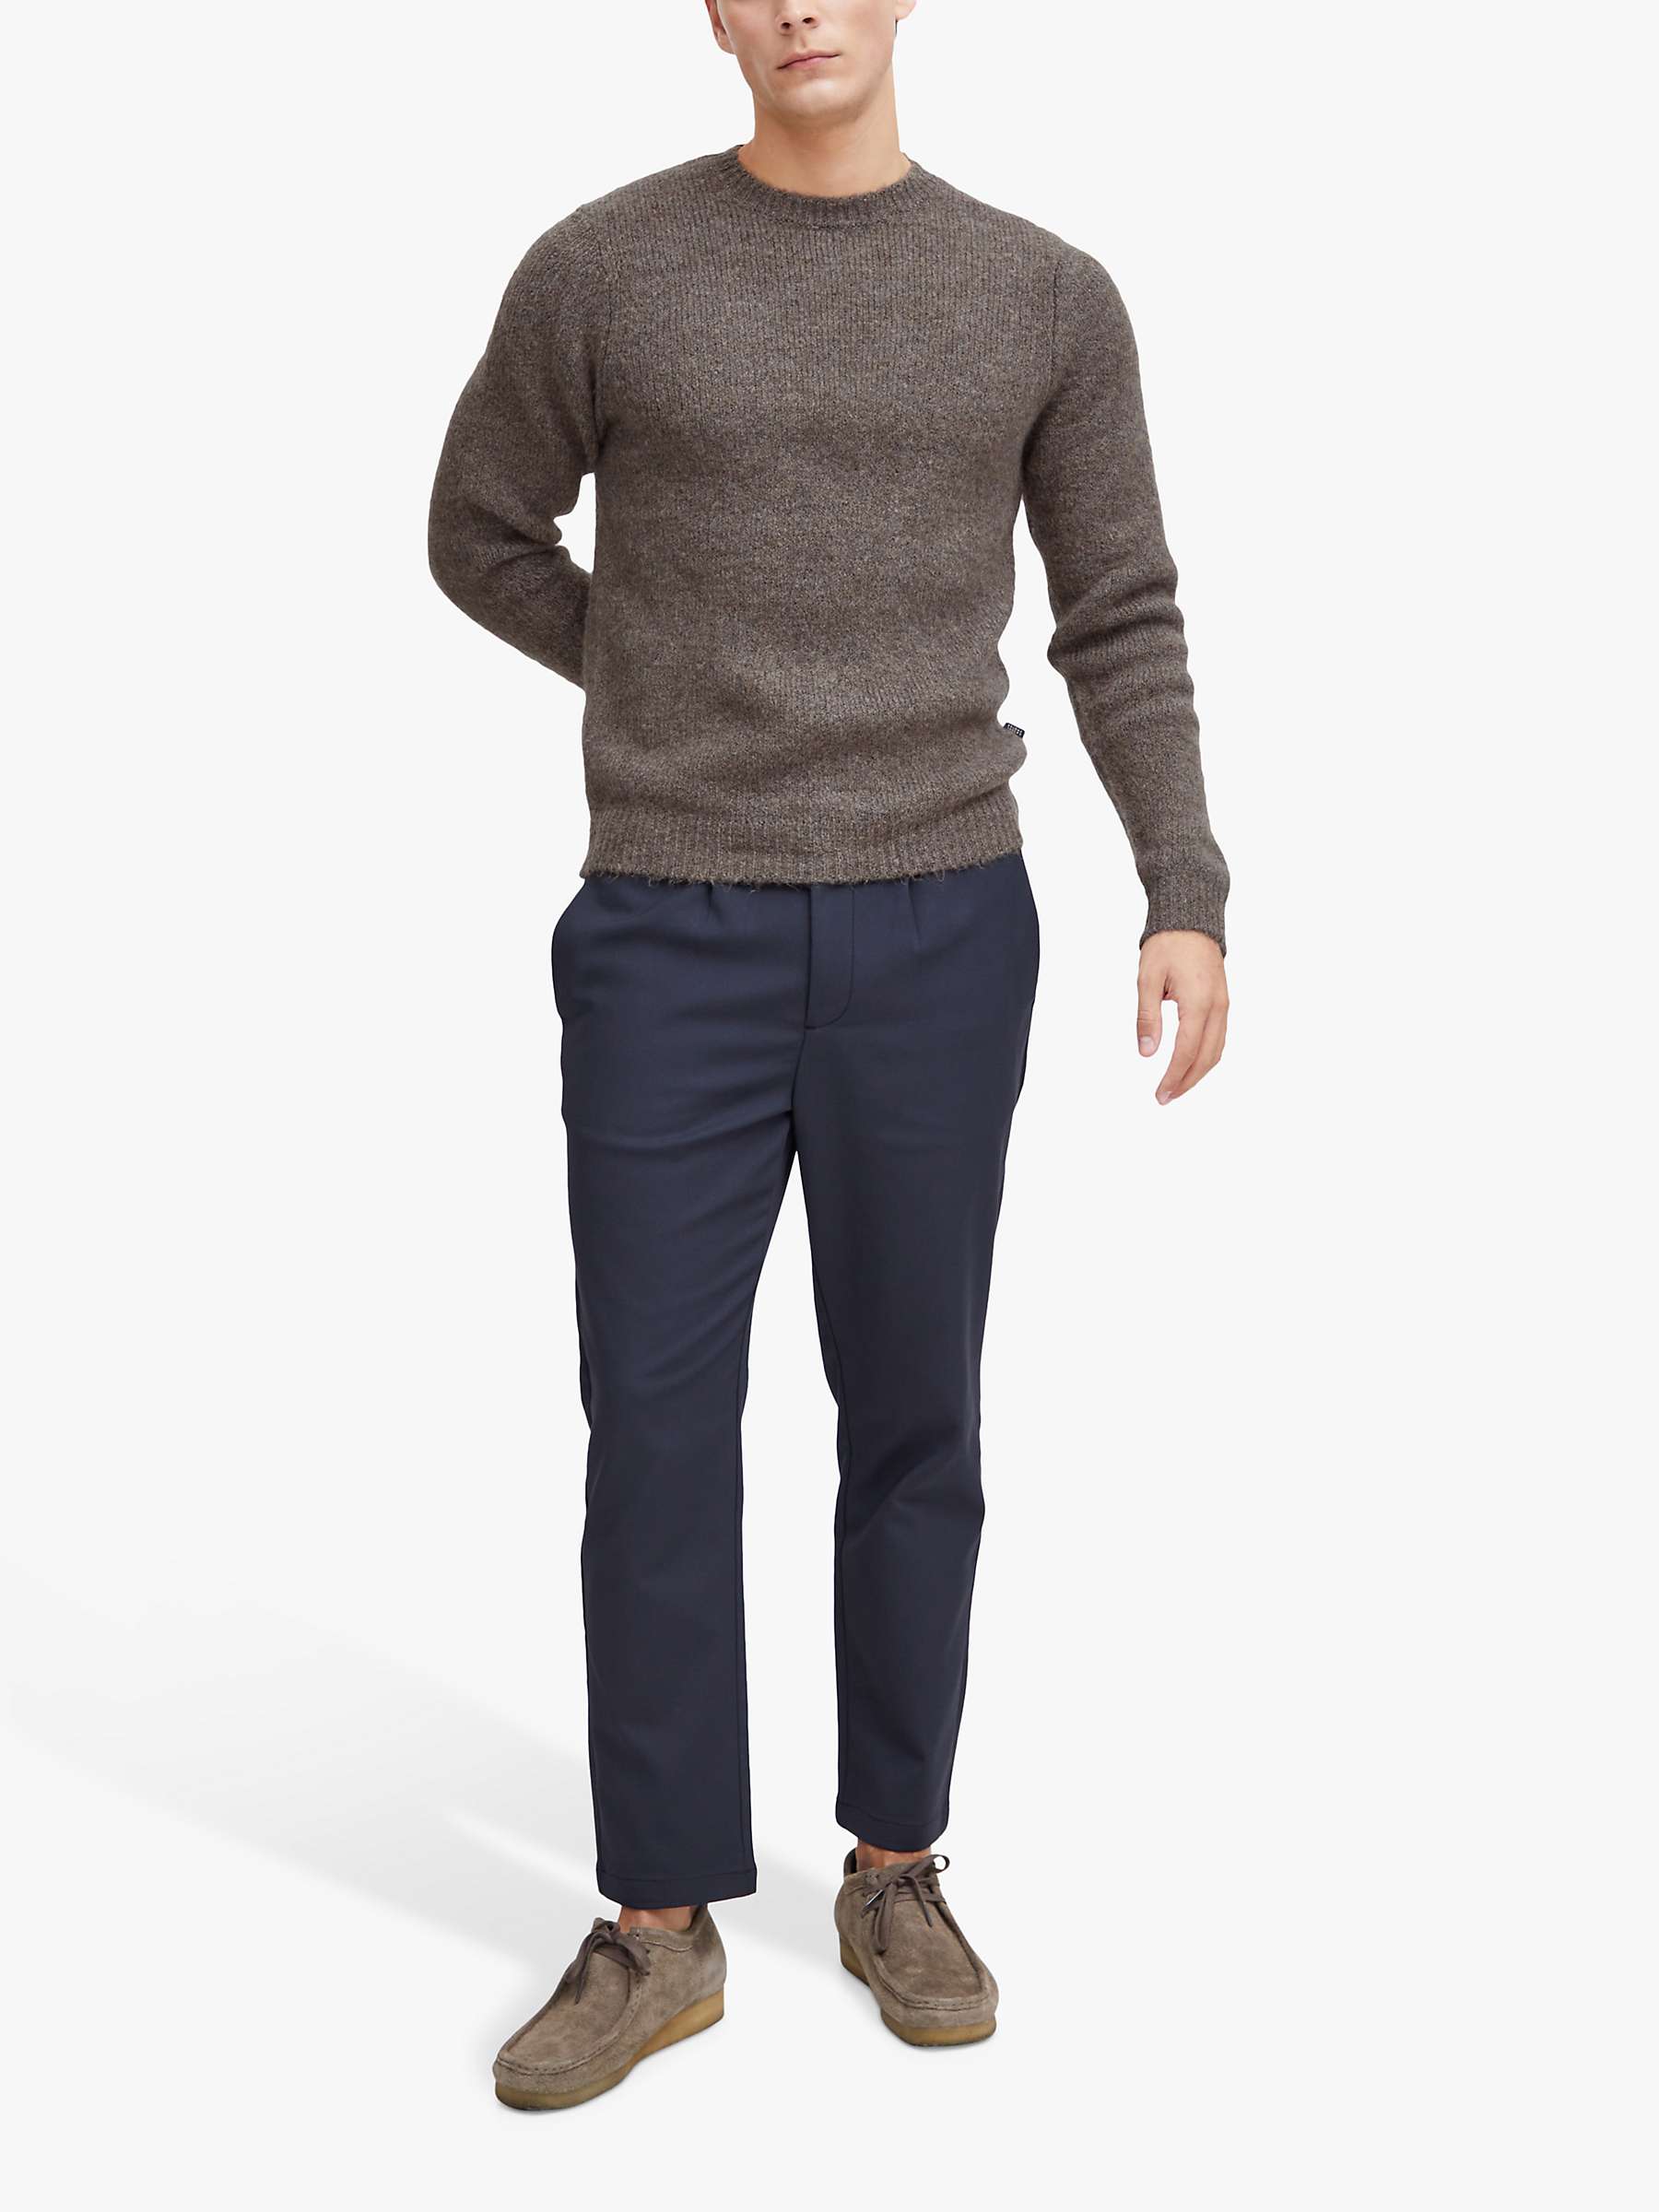 Buy Casual Friday Karl Lambswool Mix Knitted Jumper, Brown Online at johnlewis.com